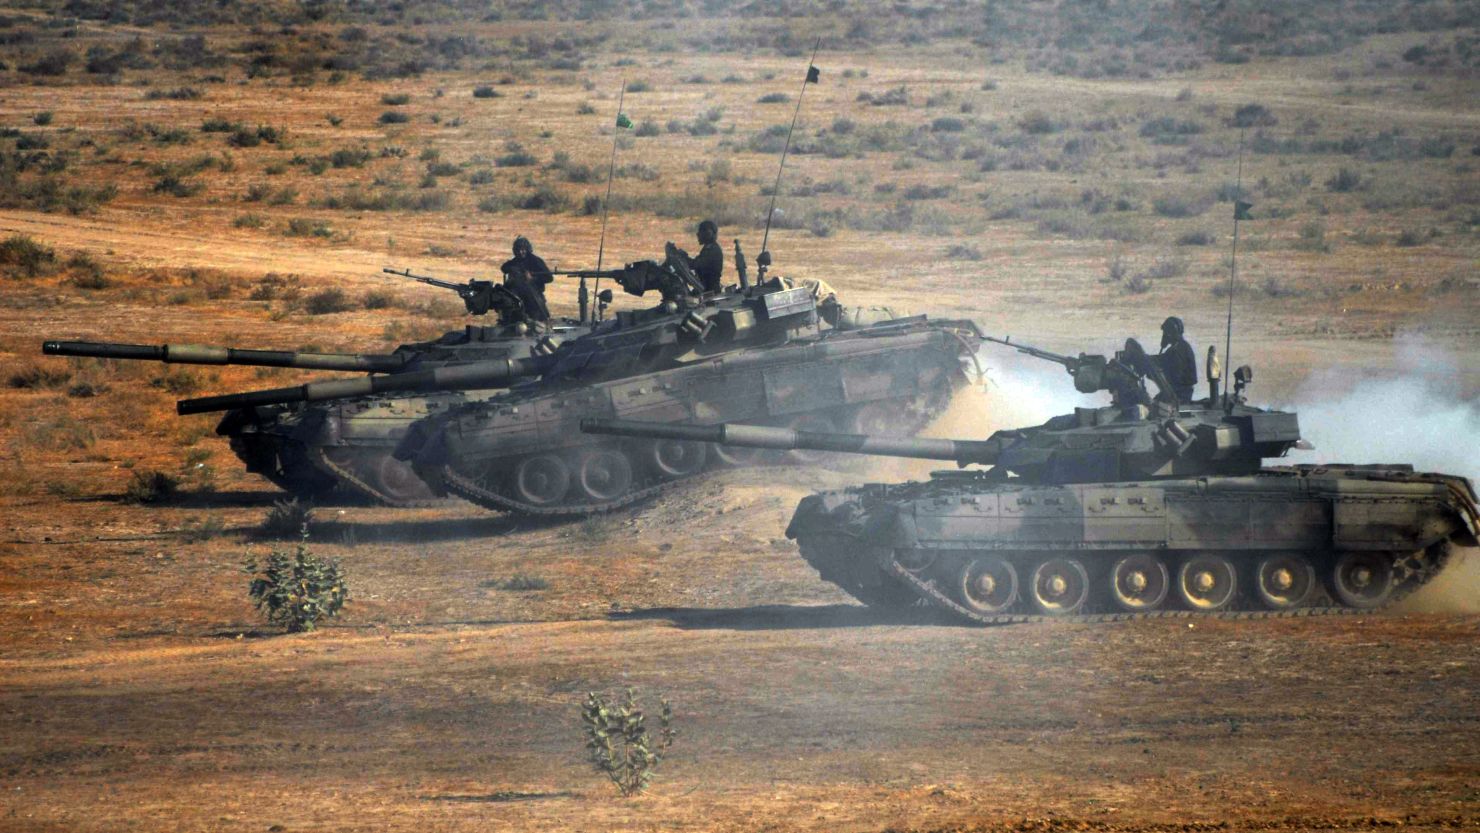 Pakistani tanks take part in an exercise Friday. Military officials were in the U.S. discussing what they say was a NATO attack.